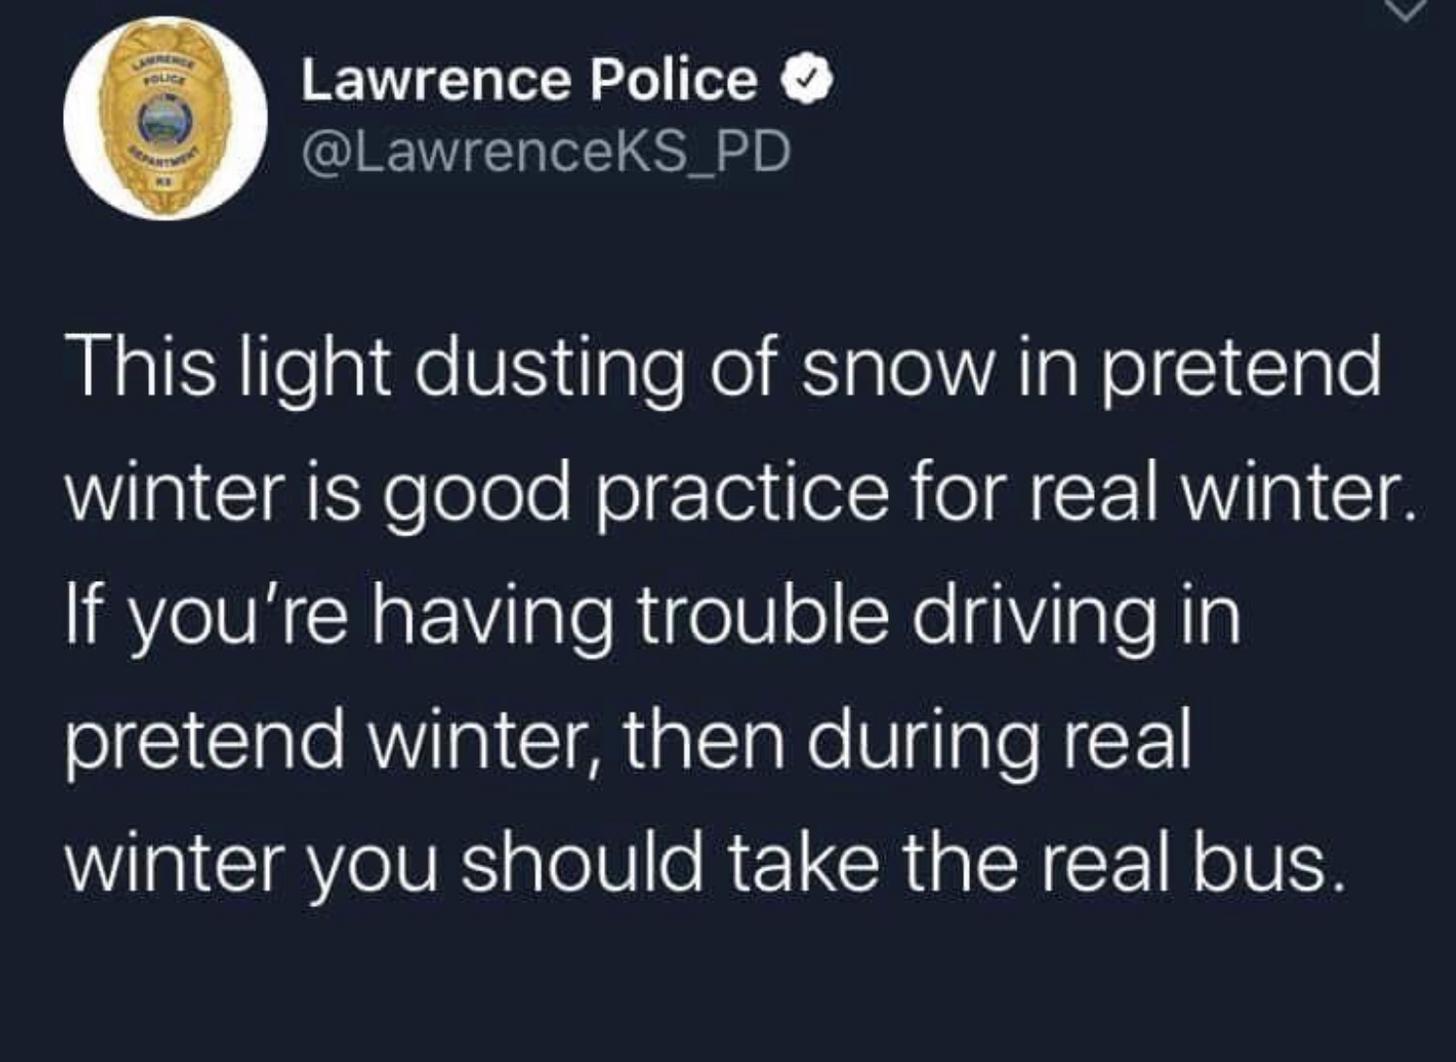 lyrics - Lawrence Police This light dusting of snow in pretend winter is good practice for real winter. If you're having trouble driving in pretend winter, then during real winter you should take the real bus.